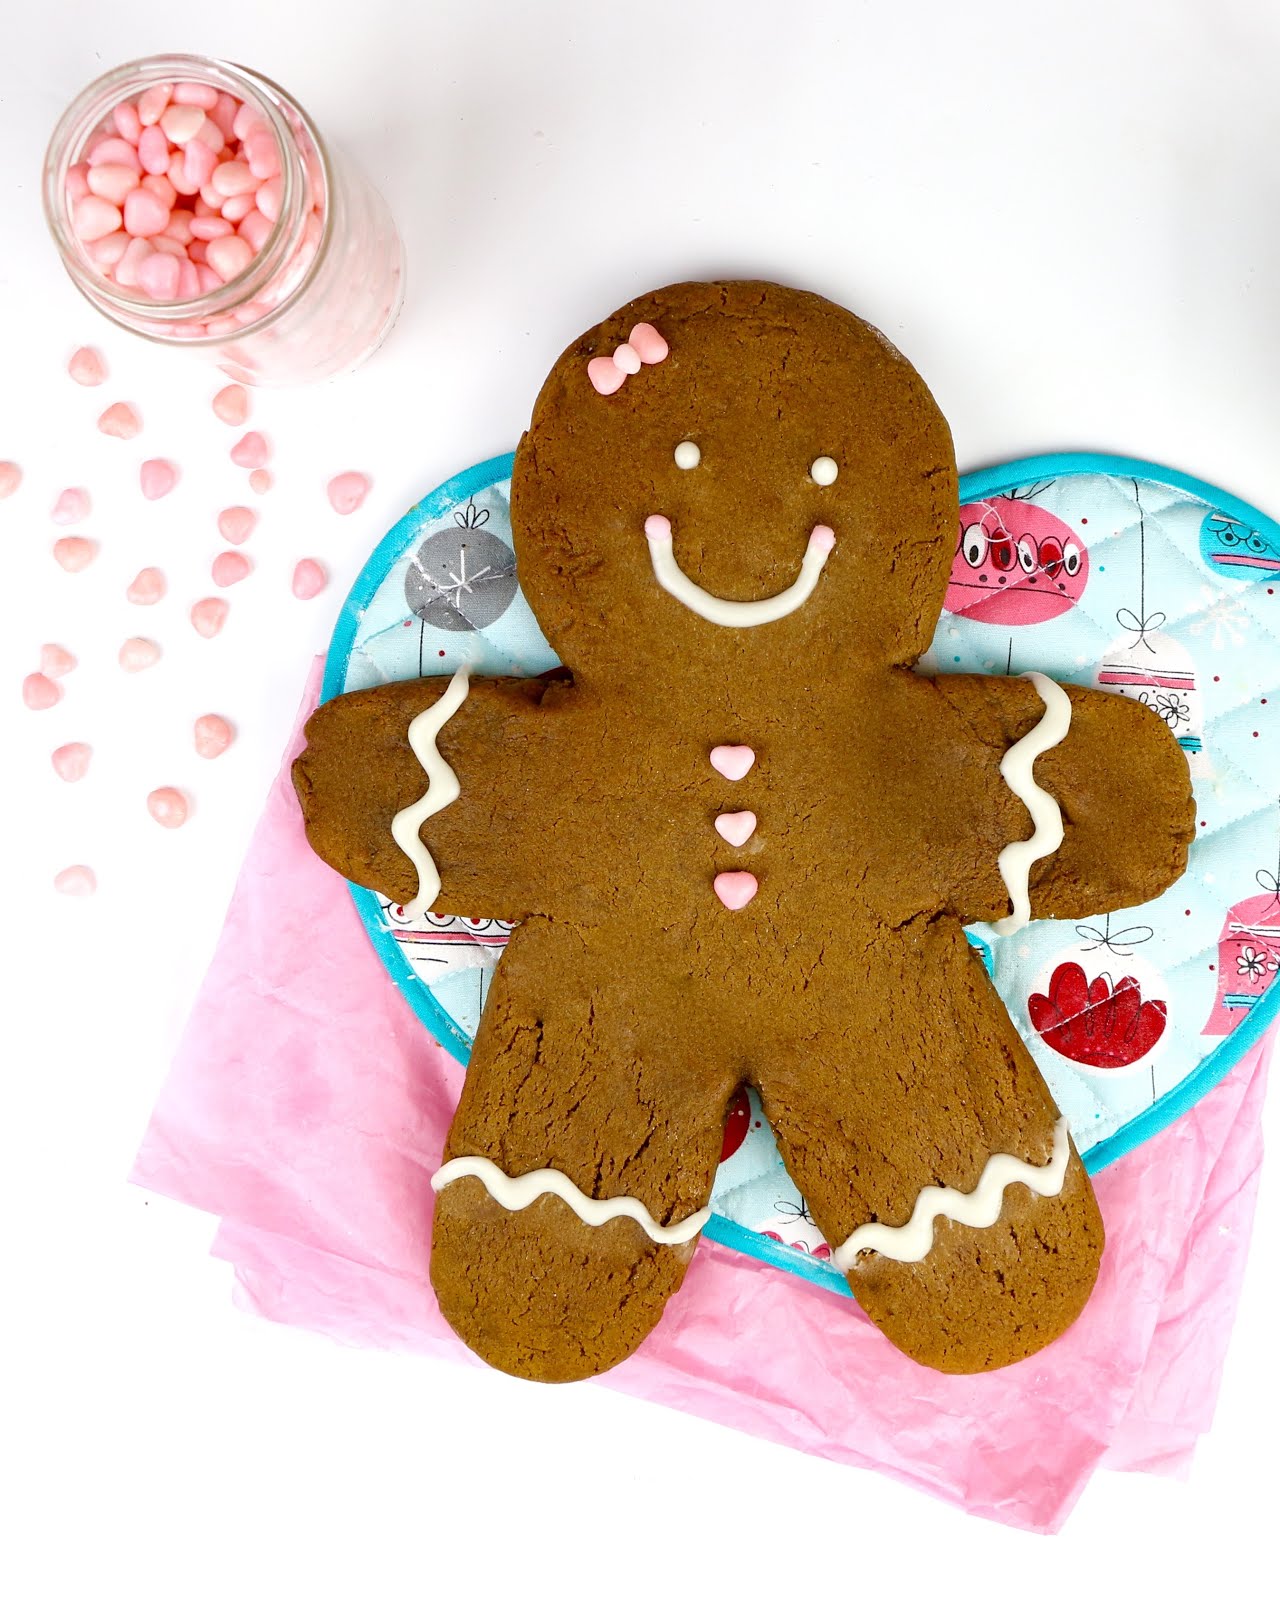 giant gingerbread man